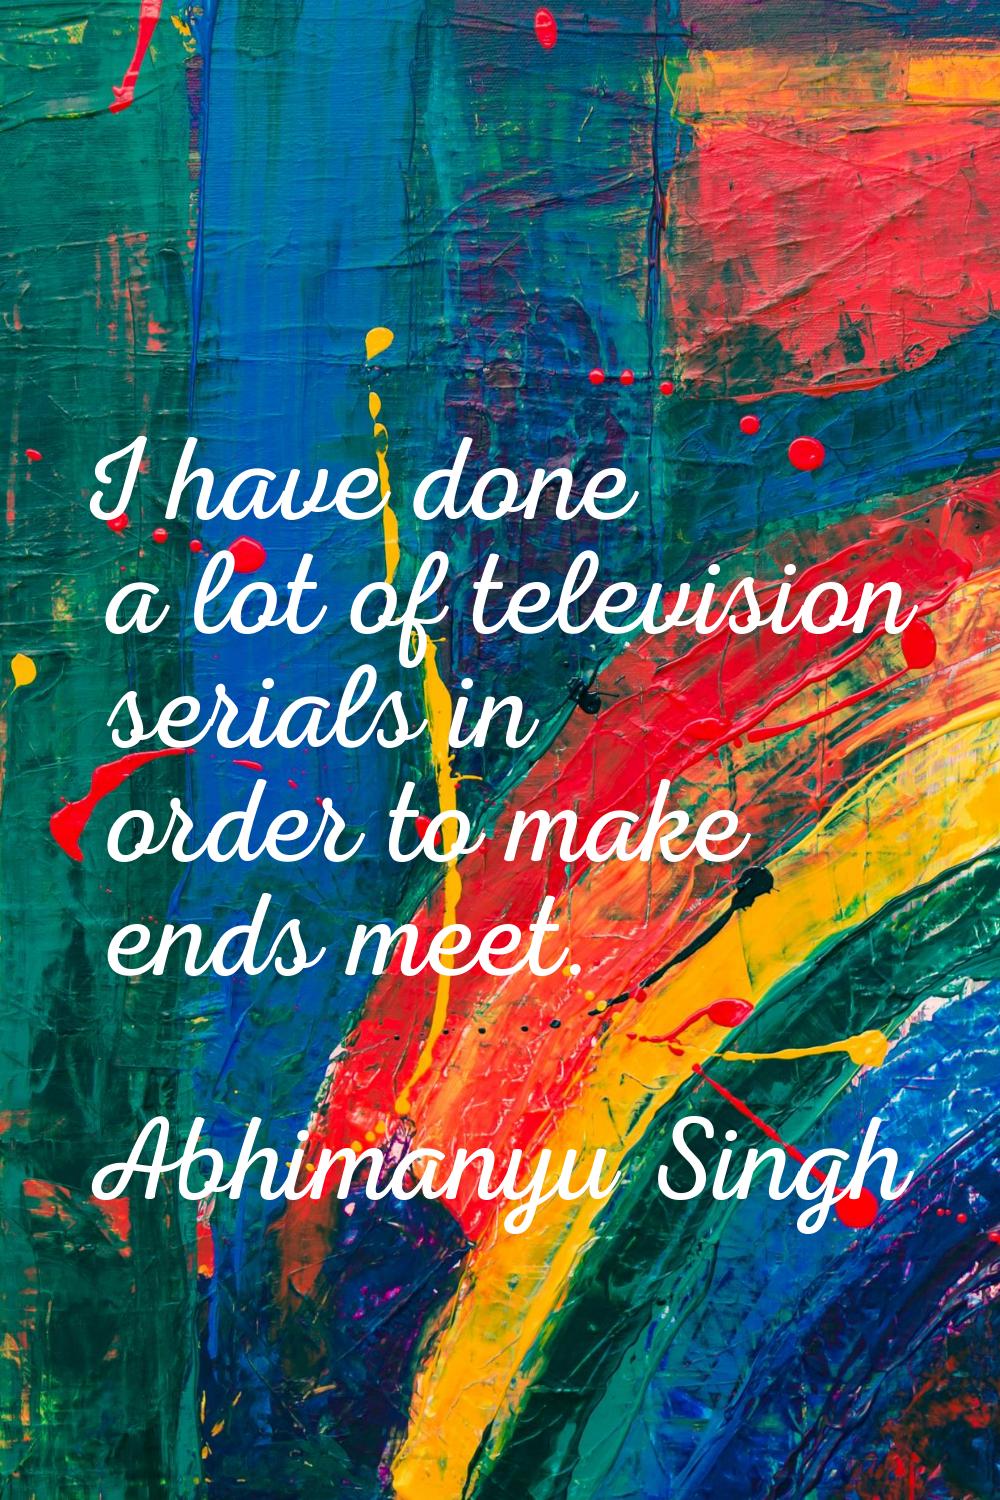 I have done a lot of television serials in order to make ends meet.